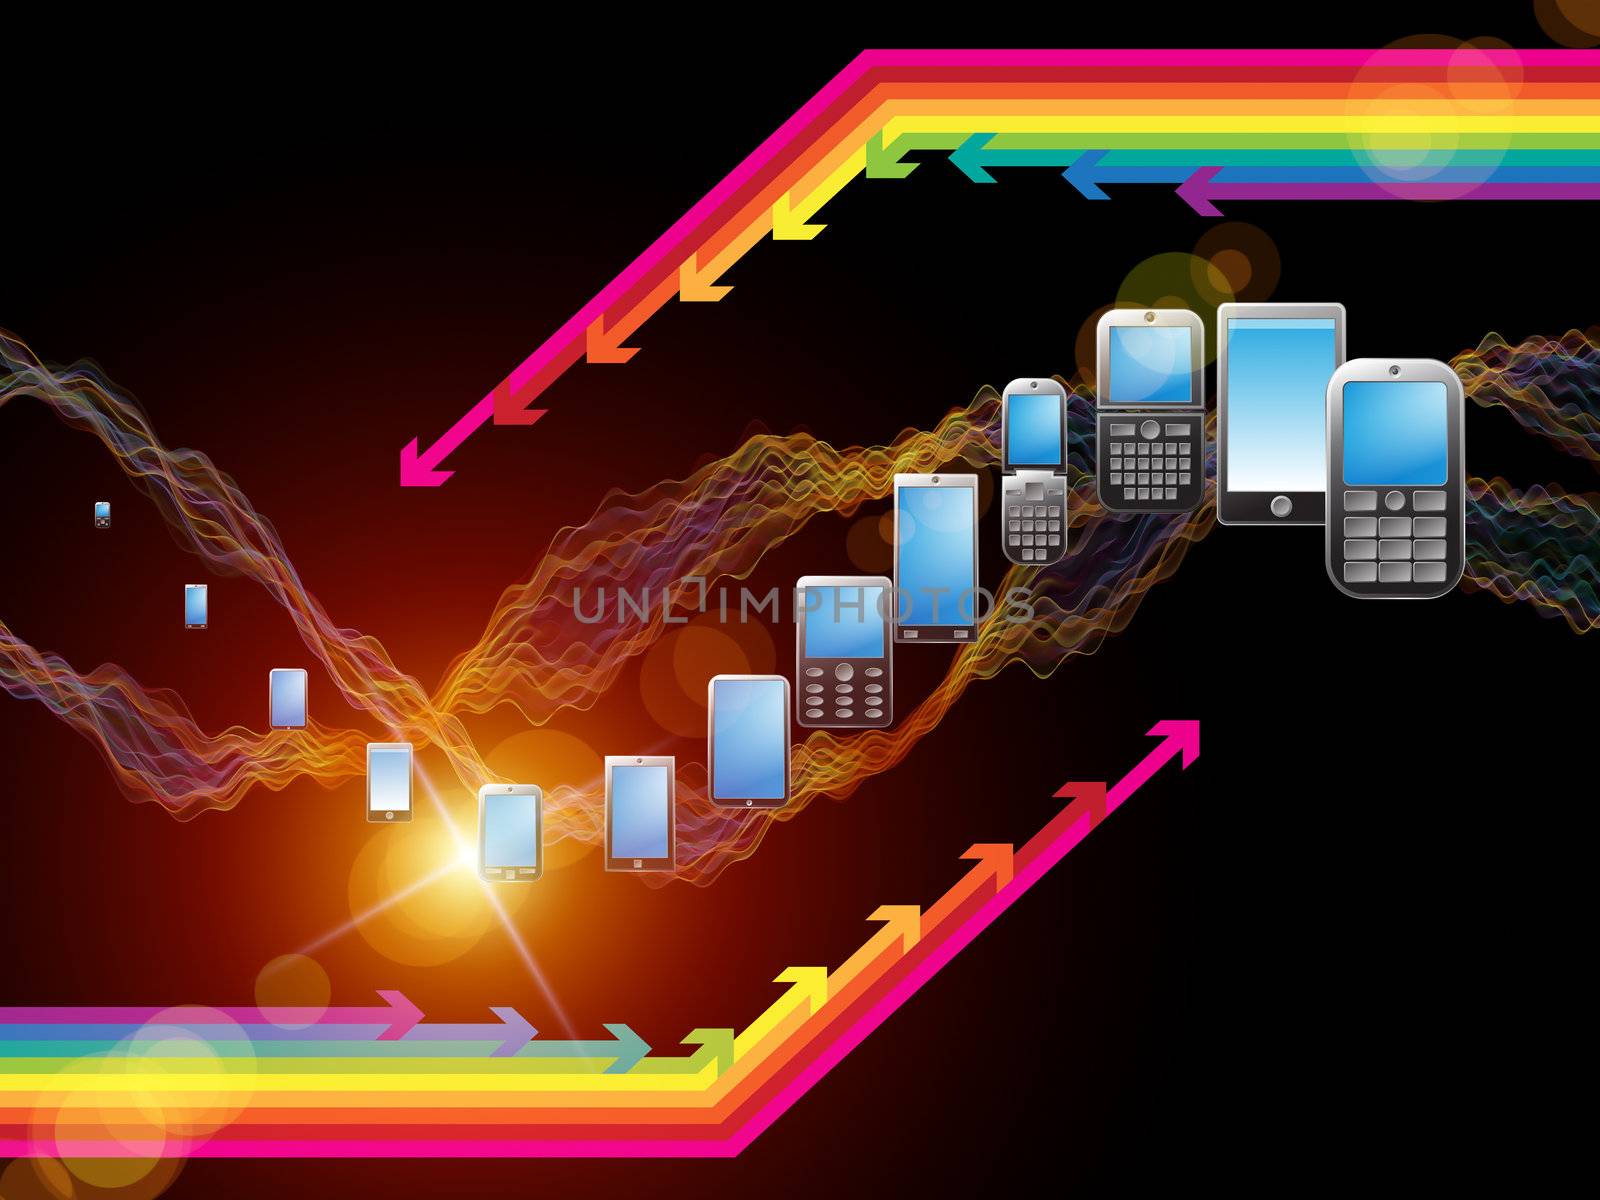 Interplay of cellular phones, arrows, lights and abstract elements on the subject of communications, connectivity and mobile gadgets